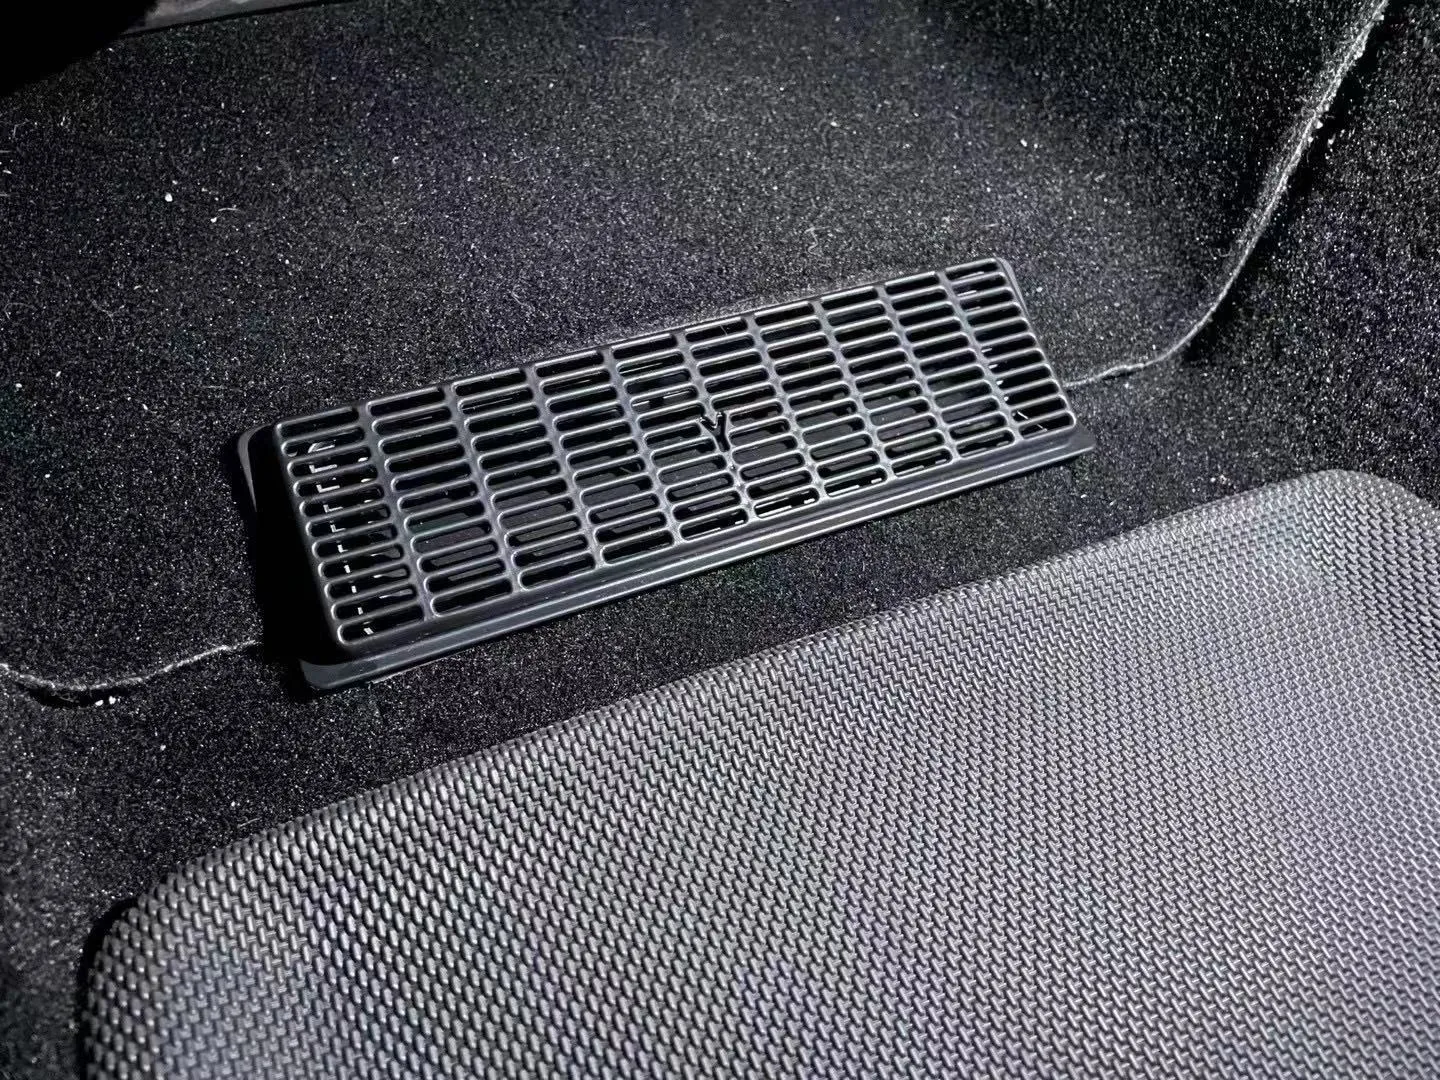 Tesla Model Y Backseat Air Vent Cover 2021 Air Flow Vent Grille Protection  For Rear Seat Frigidaire Air Conditioner Outlet Accessory From Youe, $11.06